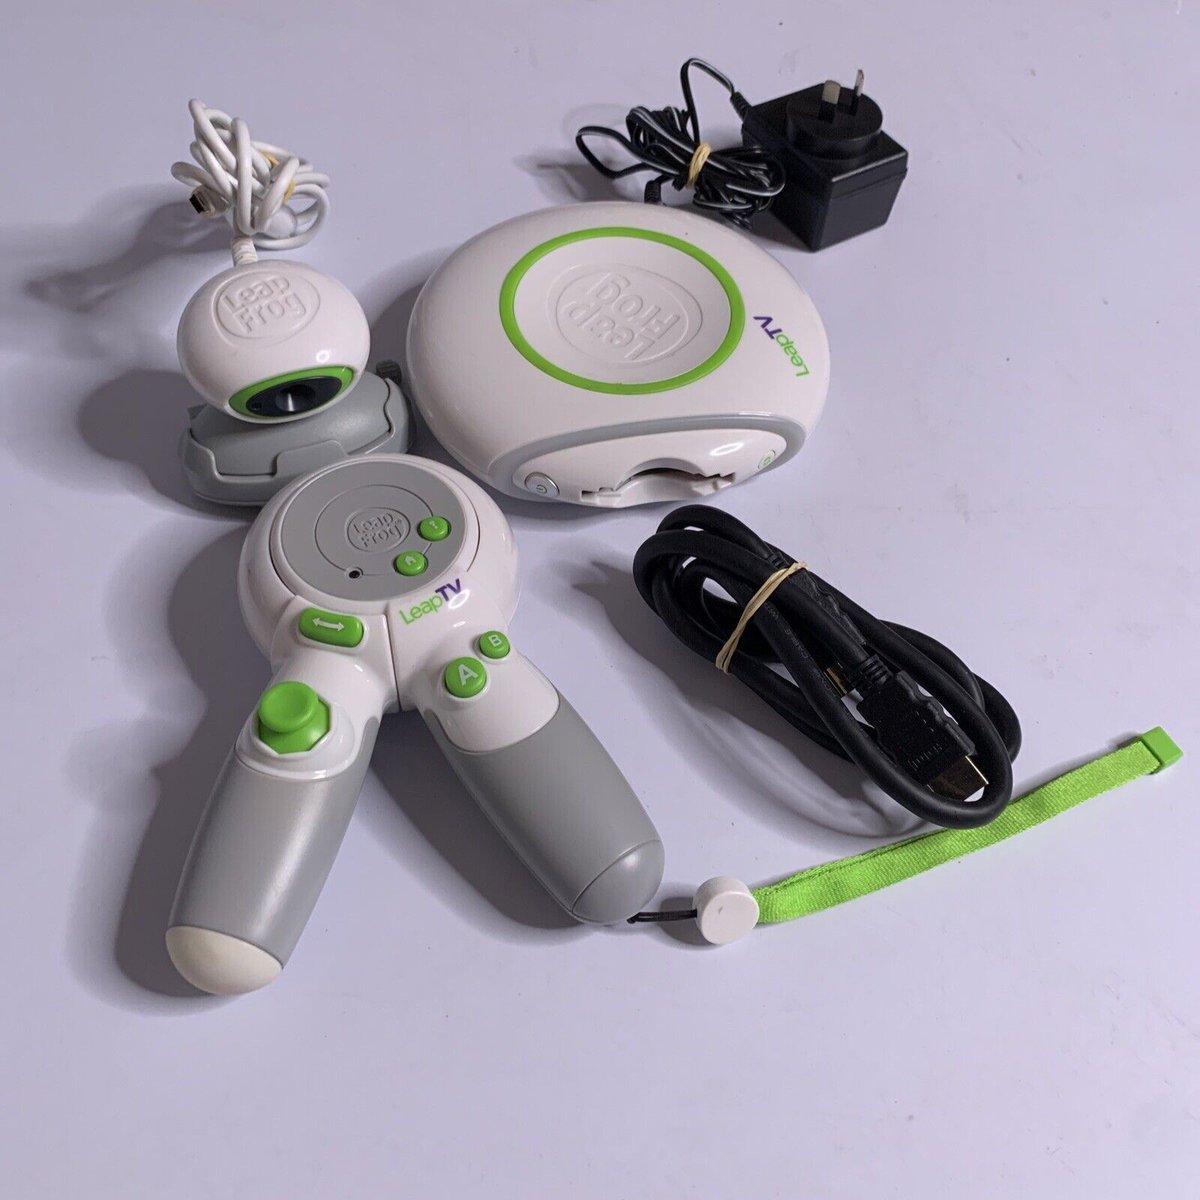 The LeapFrog LeapTV Console Educational Gaming System is designed to provide an interactive and engaging learning experience for children. 
#LeapFrogLeapTV
#EducationalGaming
#ActiveLearning
#LearningThroughPlay
#KidsGames 
retrounit.com.au/products/leapf…